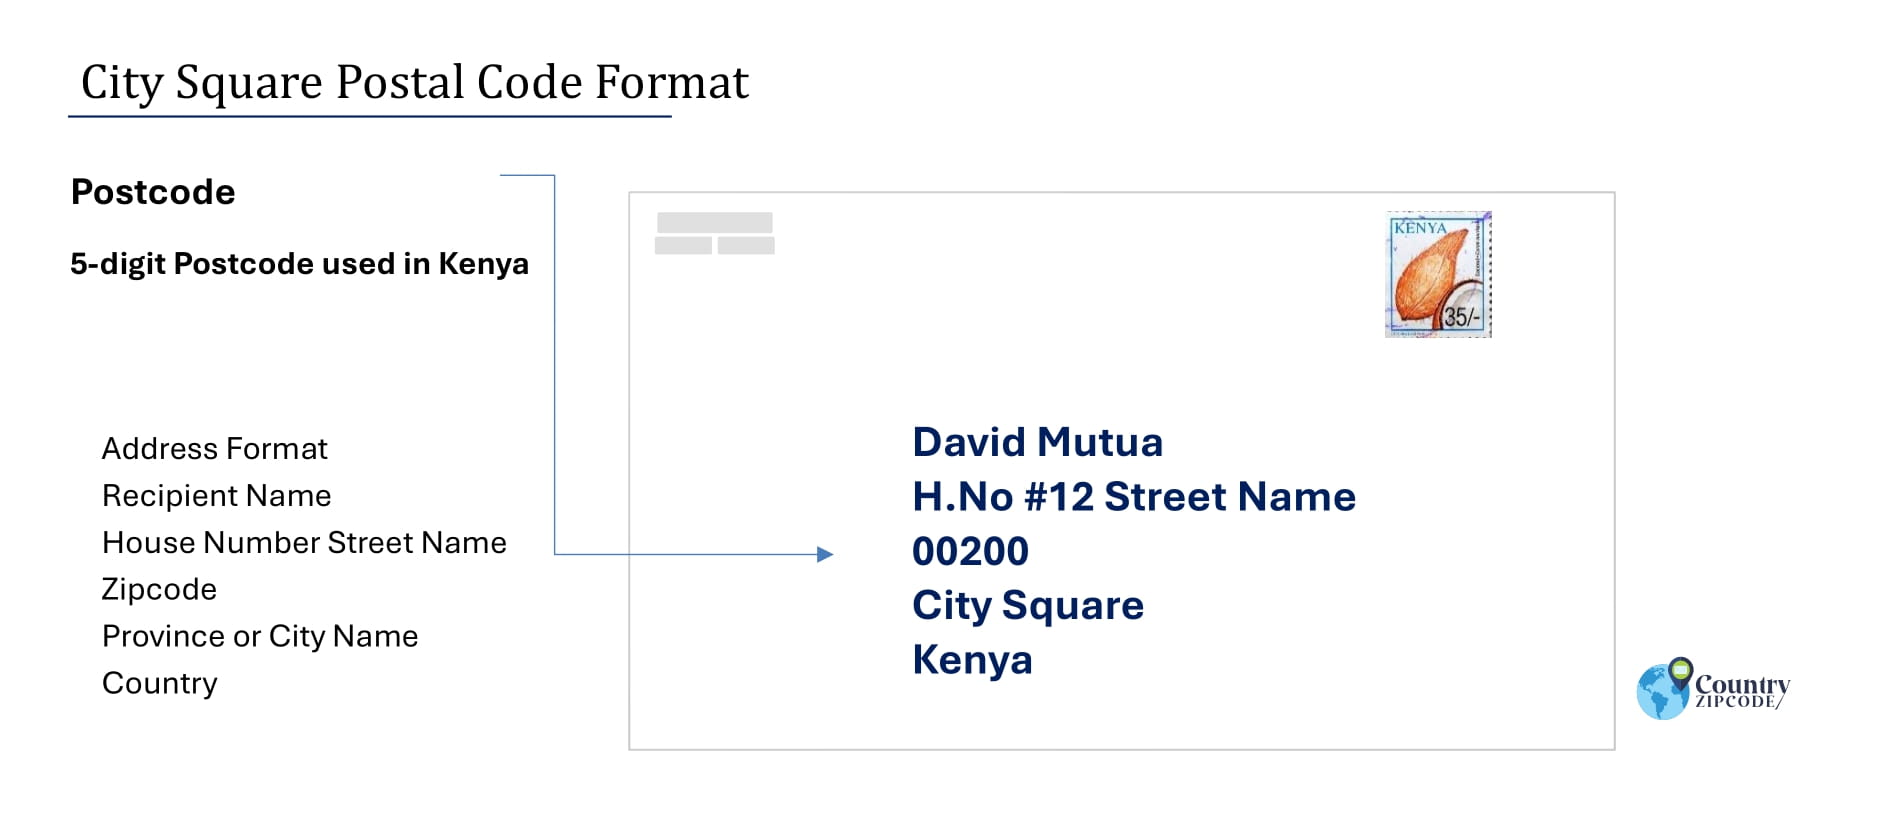 Example of City Square Address and postal code format